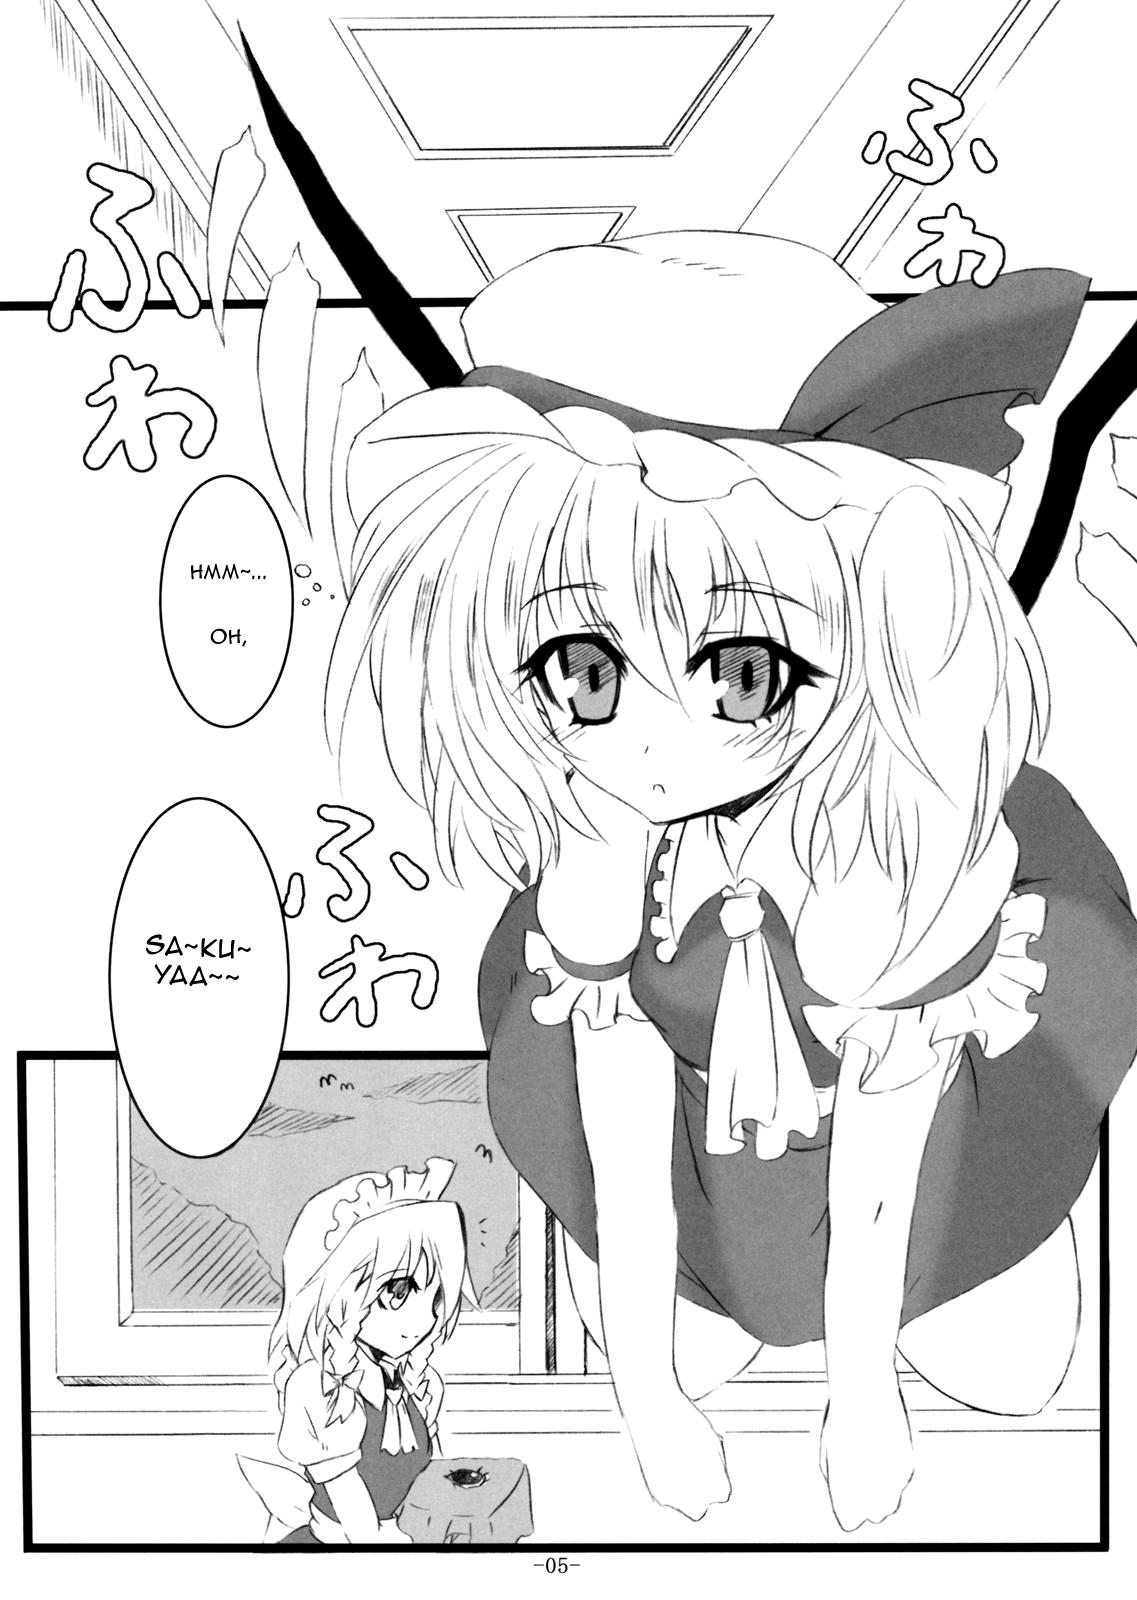 Argentina Gensou Enkou - Touhou project All Natural - Page 5